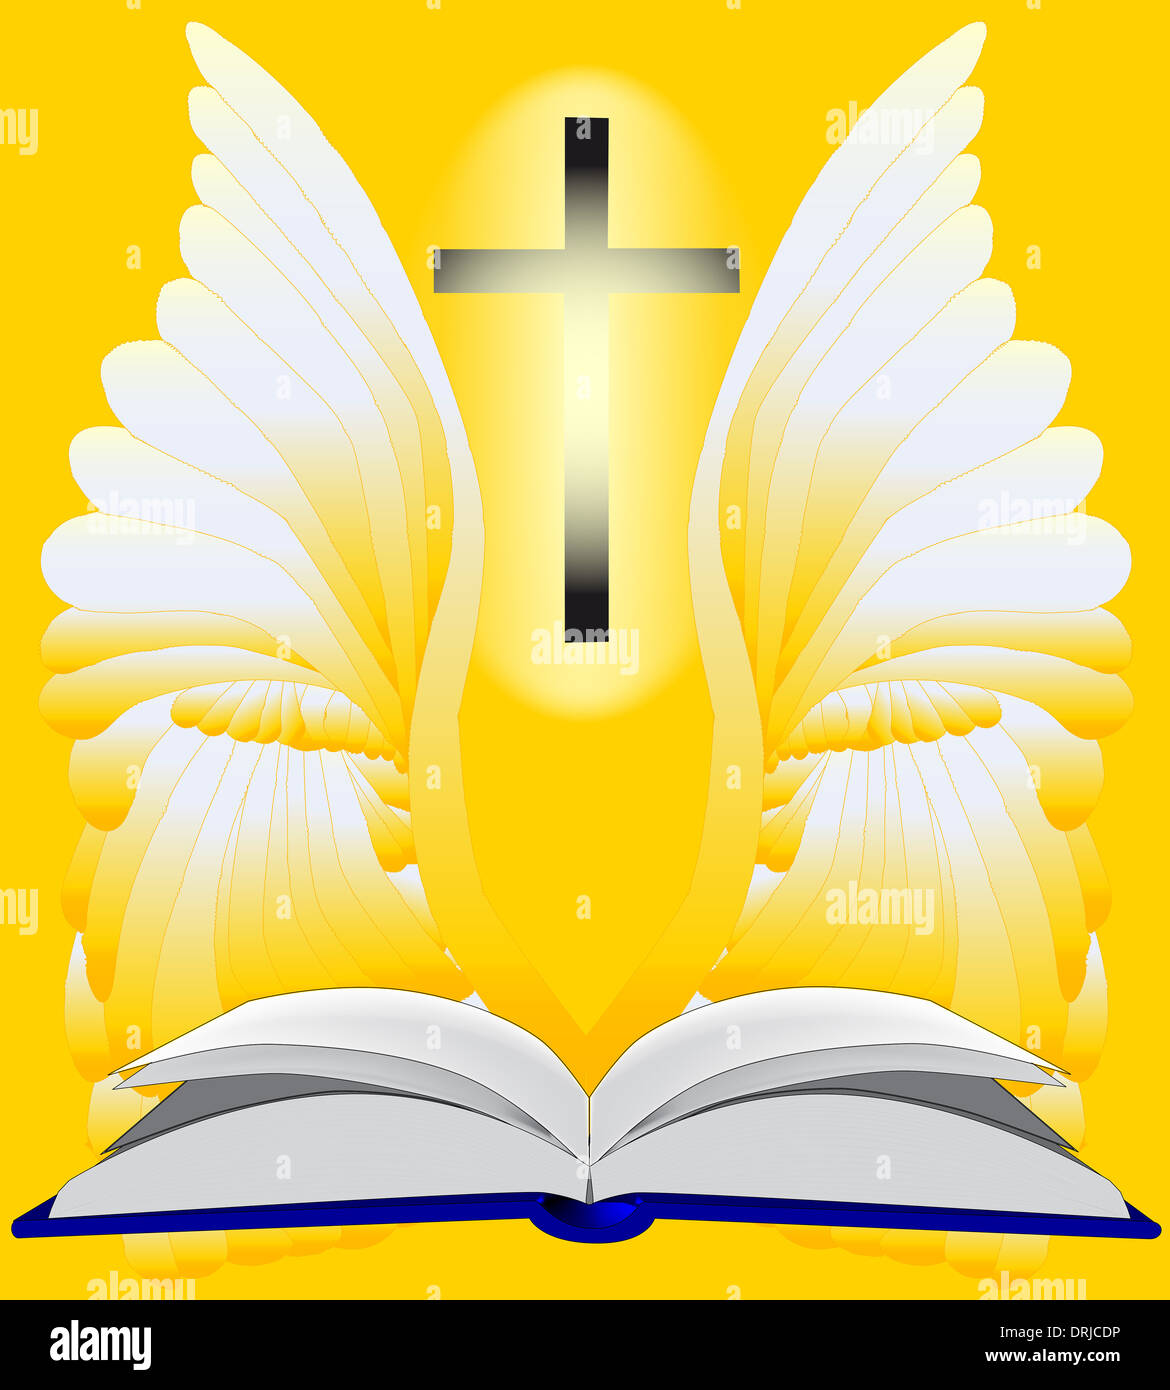 Image result for open bible and angels